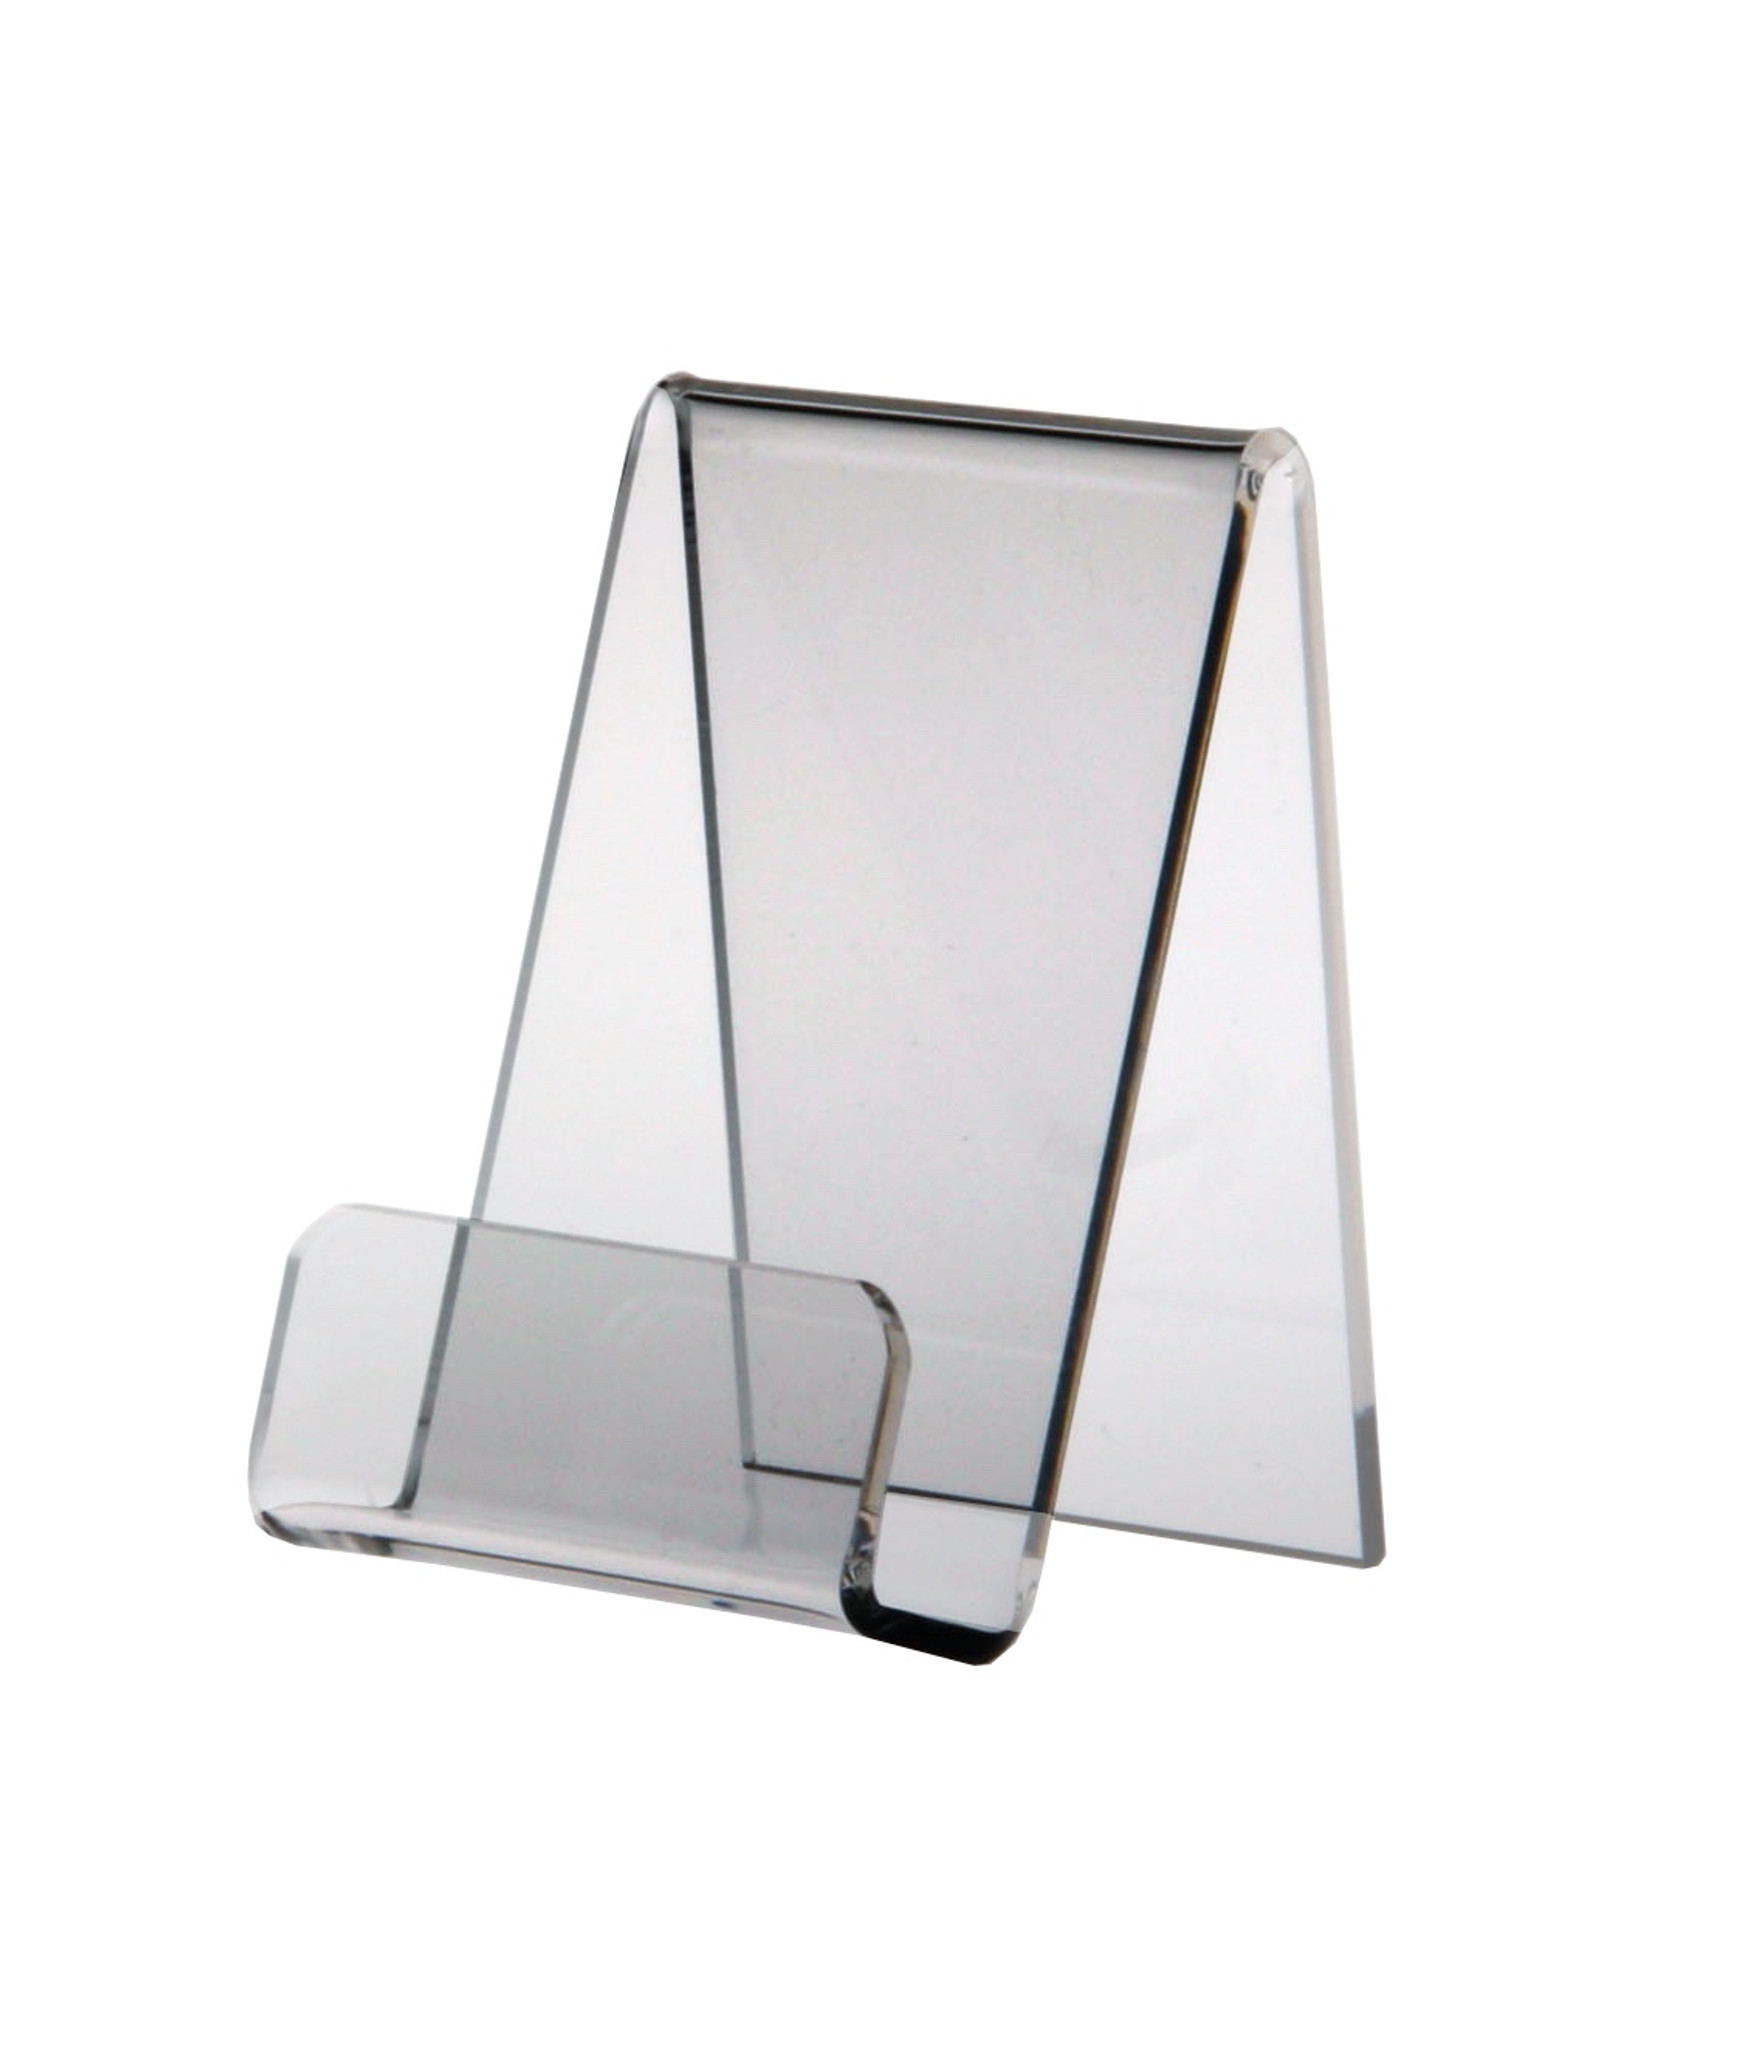 Small Black Display Easels, Acrylic Easel Stands